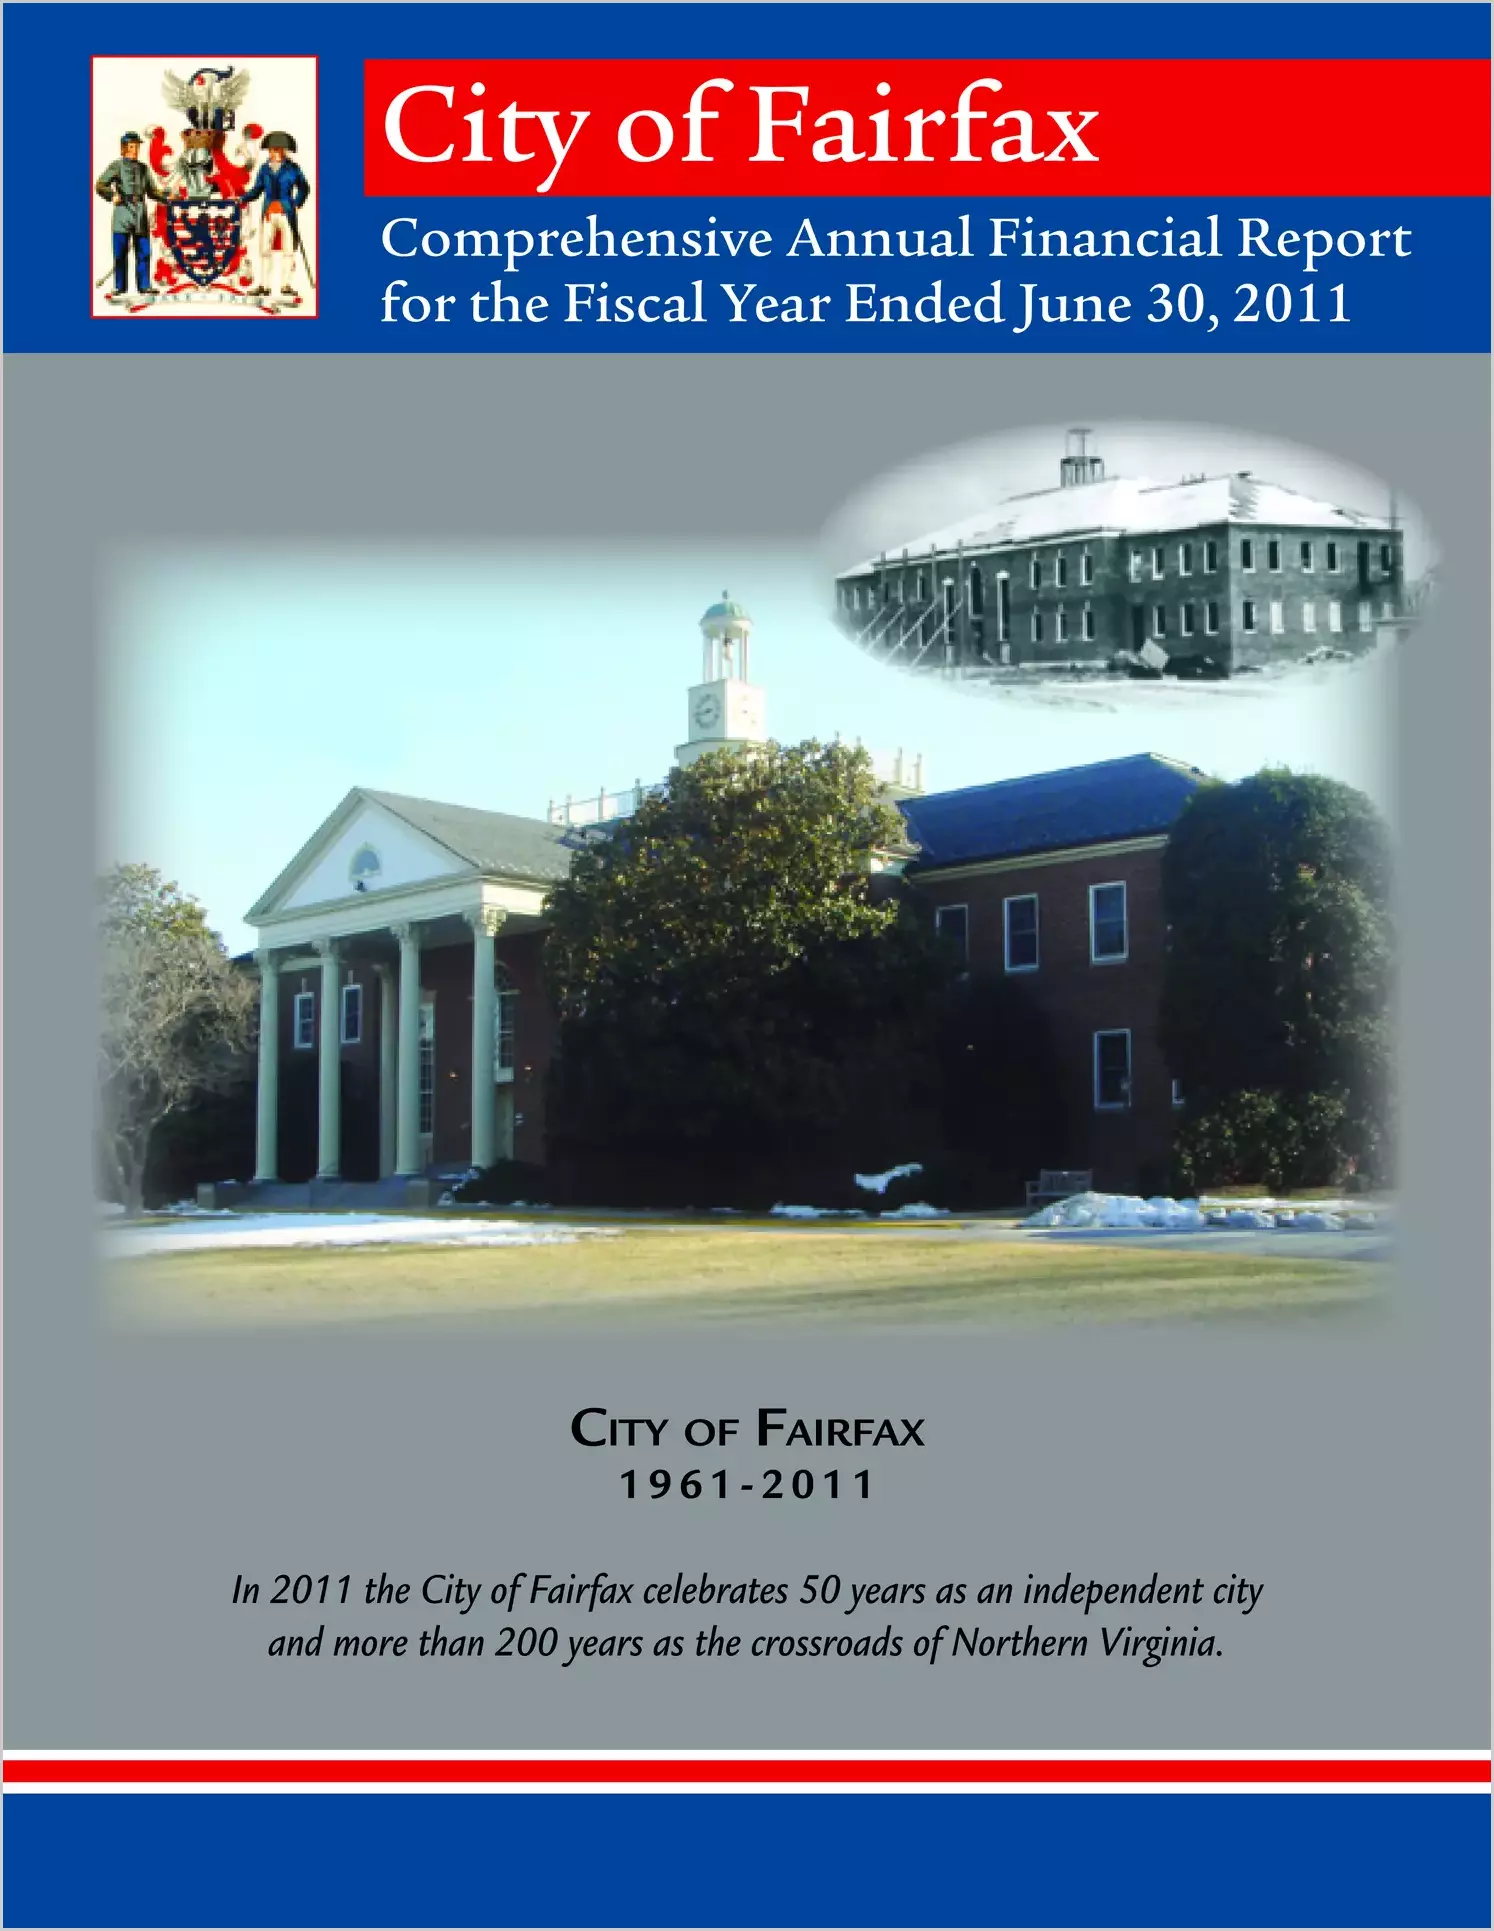 2011 Annual Financial Report for City of Fairfax